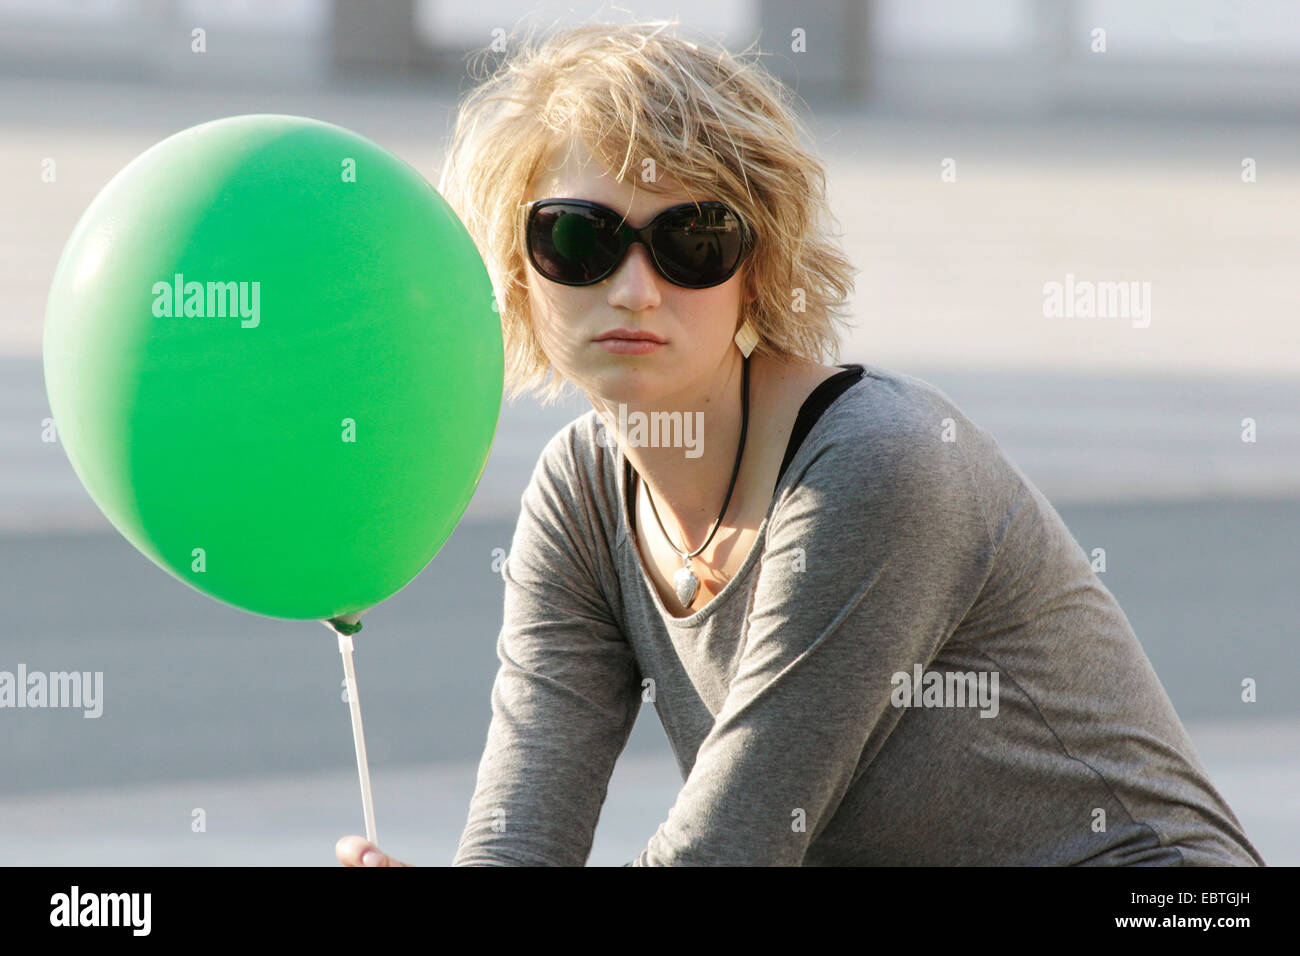 young blond woman with sunglasses and green balloon, Germany Stock Photo